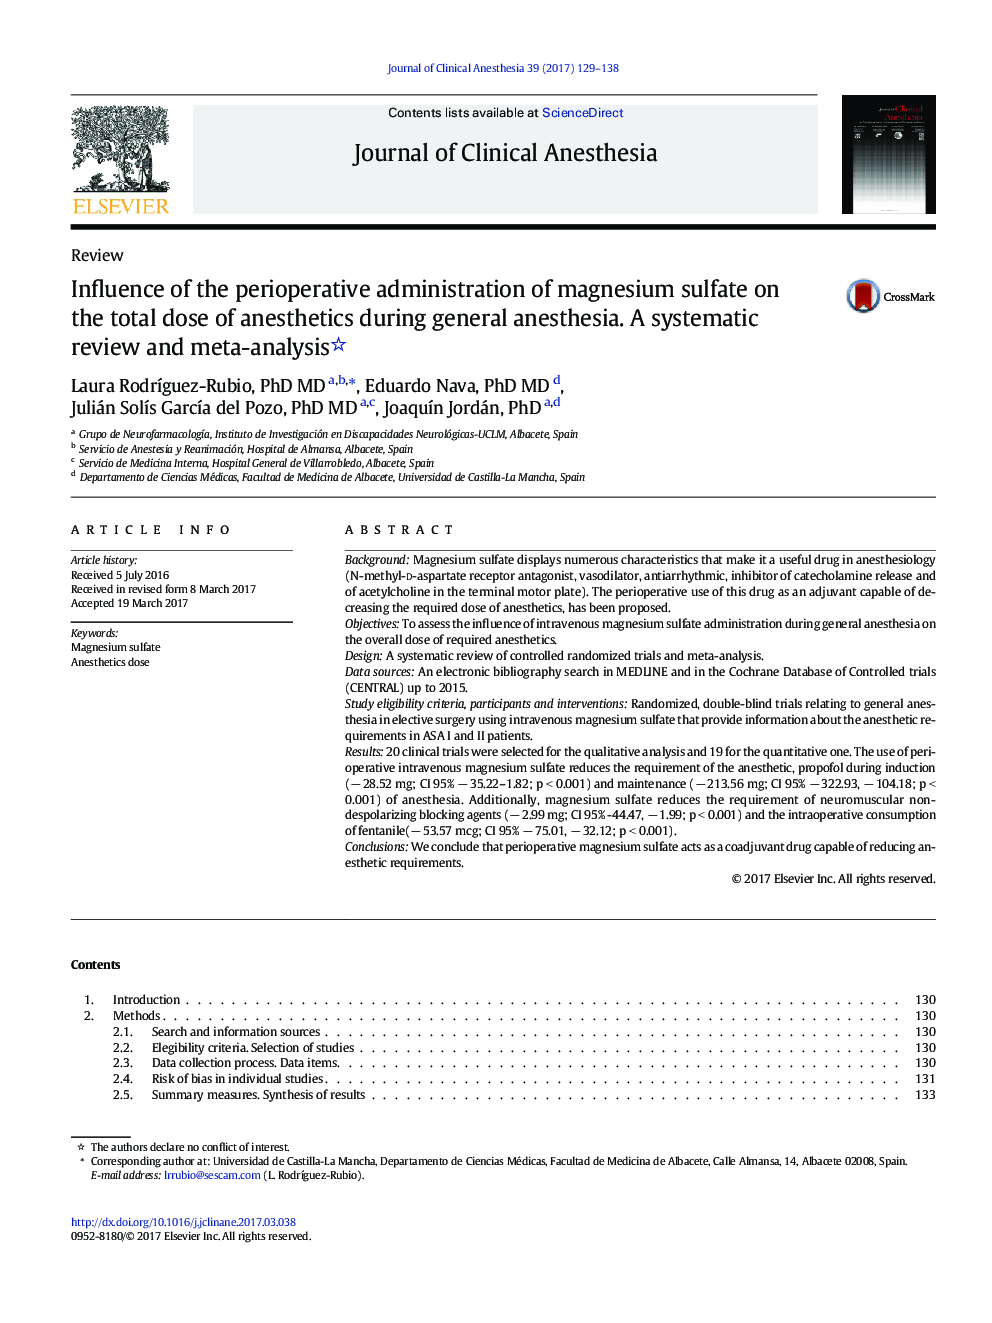 Influence of the perioperative administration of magnesium sulfate on the total dose of anesthetics during general anesthesia. A systematic review and meta-analysis